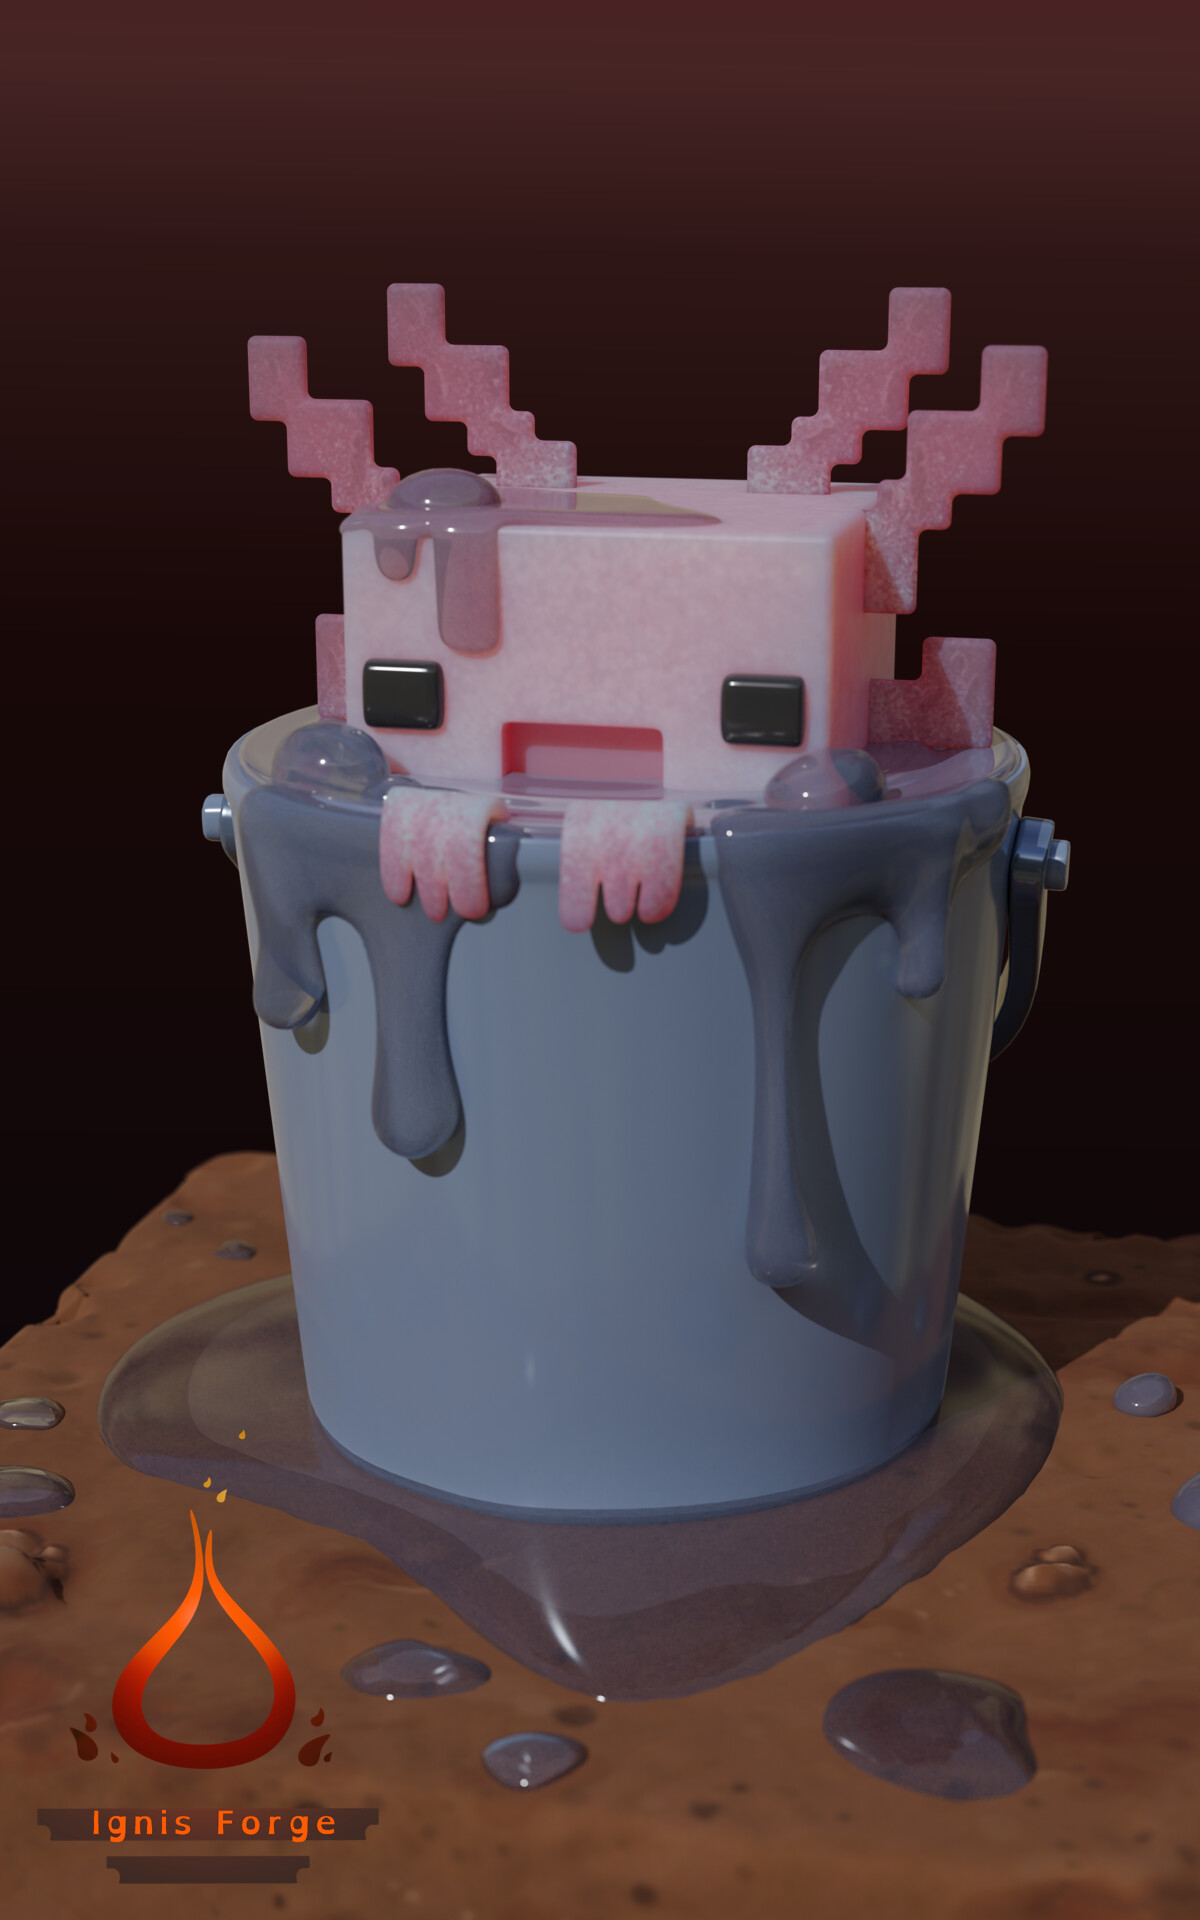 Axolotl from the Minecraft cave update, Ignis Forge